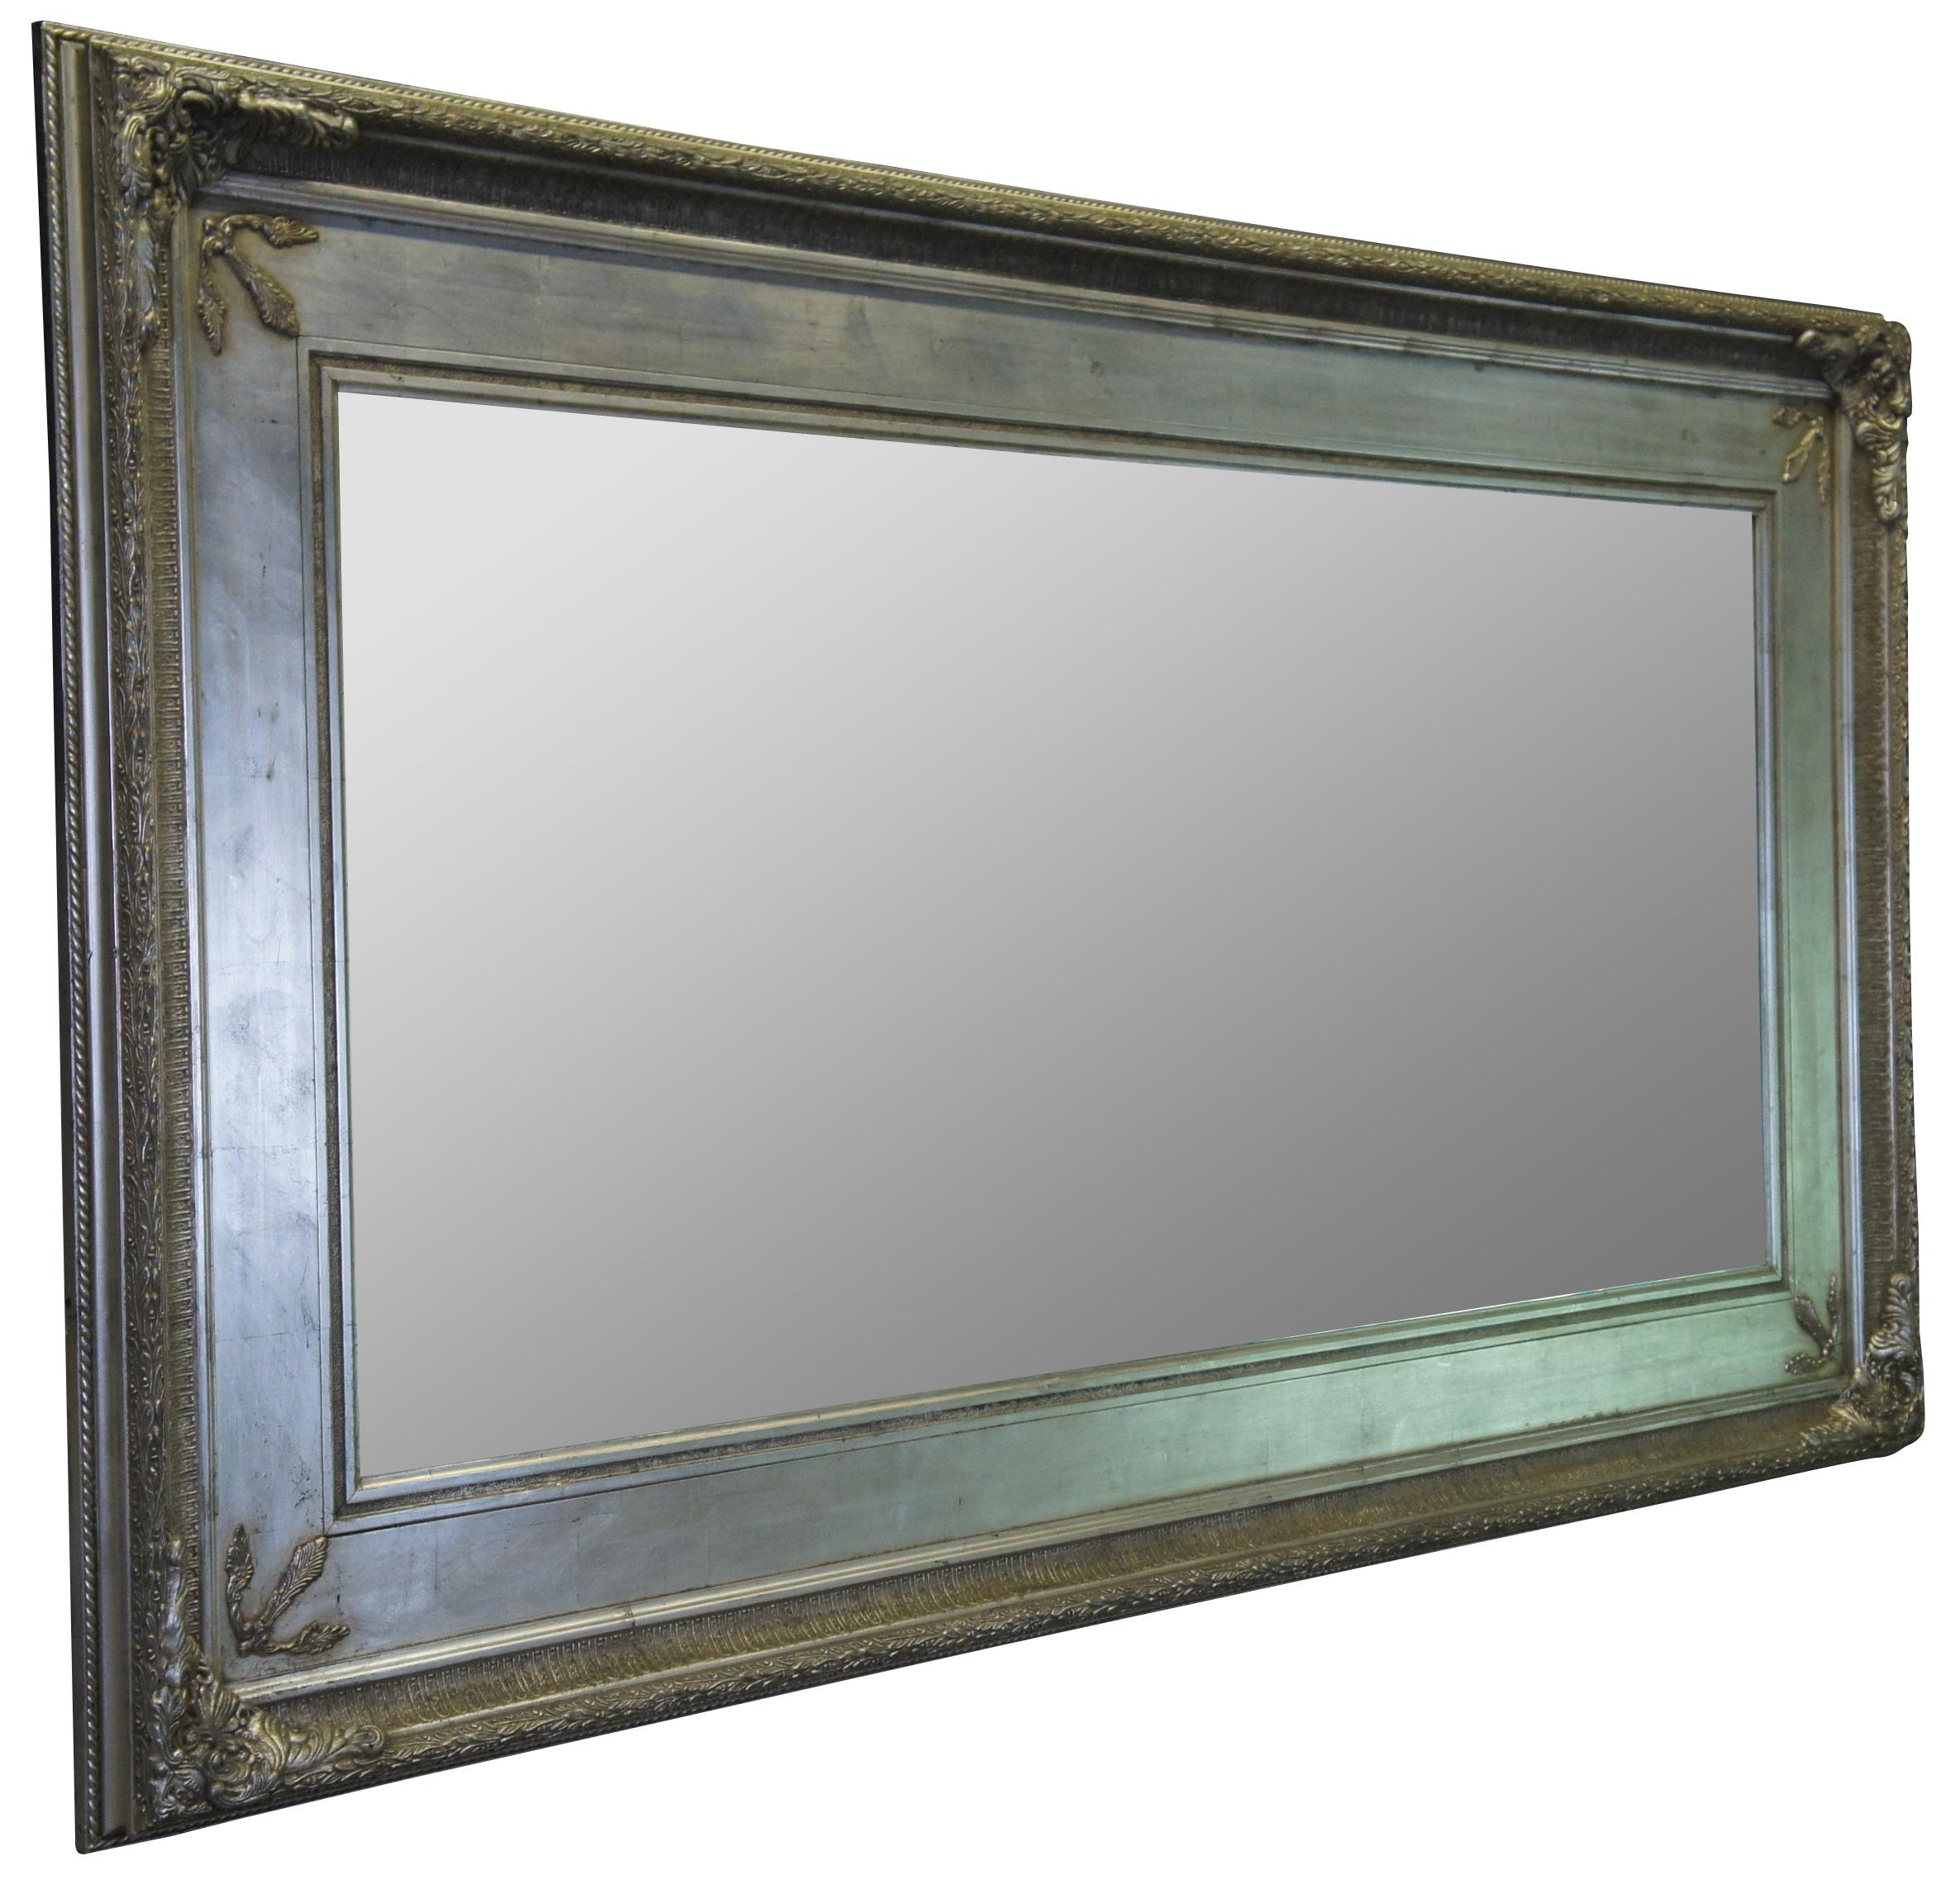 Transitional French inspired full length mirror. Finished in silver with acanthus leaf carvings.
 